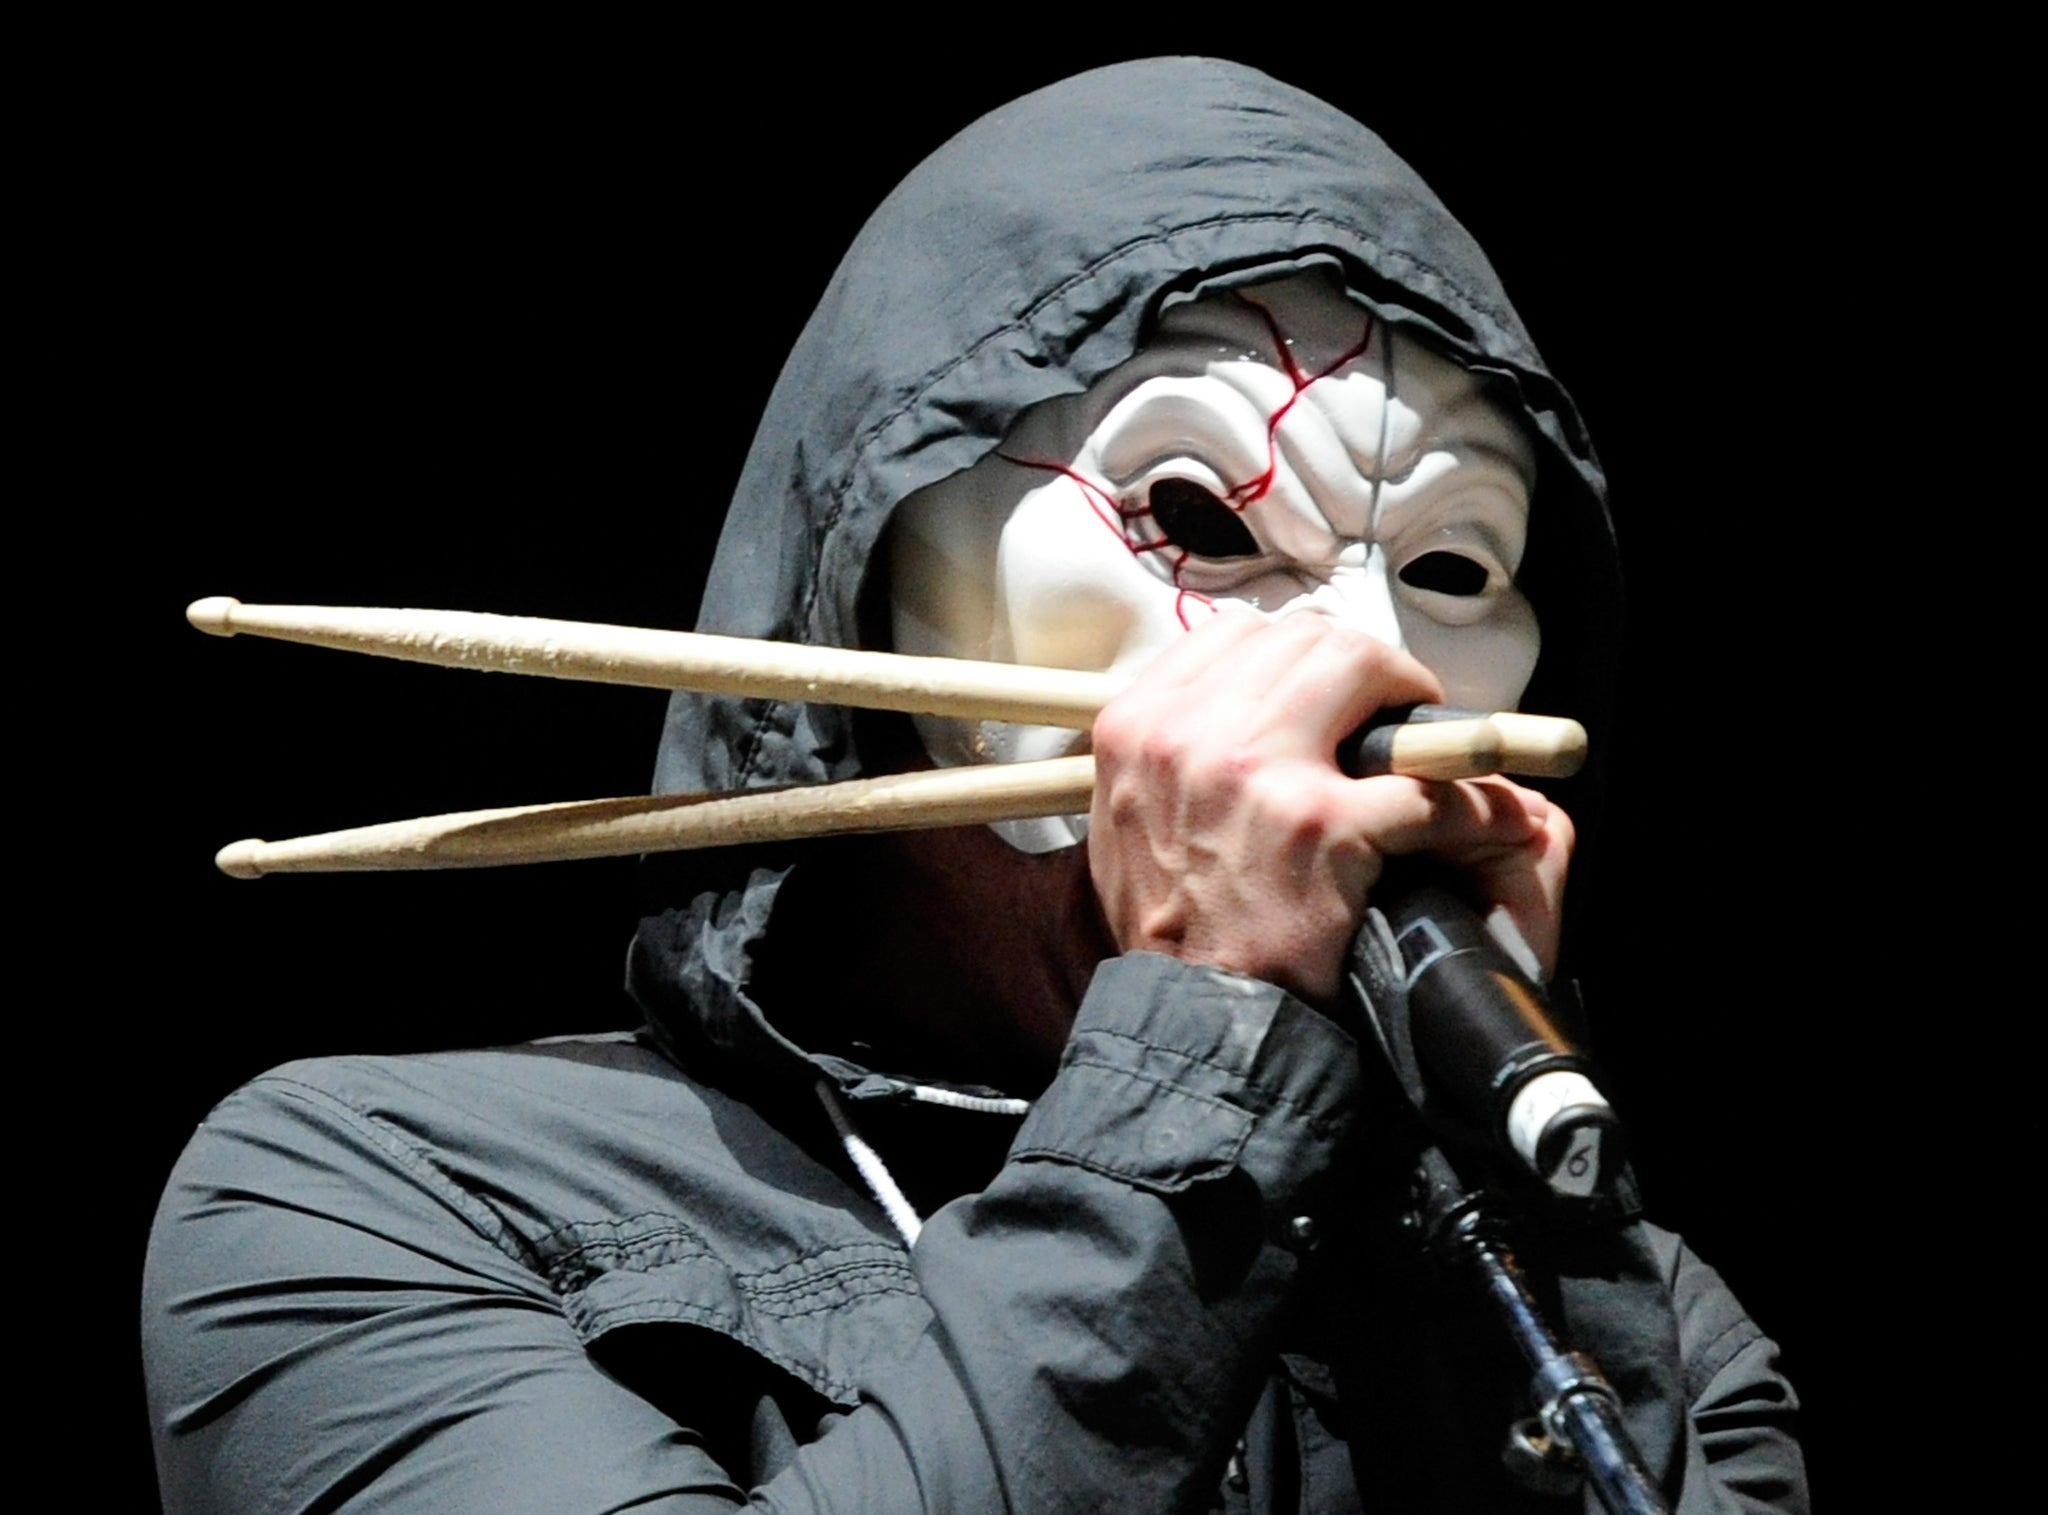 Da Kurlzz of Hollywood Undead. Scuzz TV was £10,000 for broadcasting one of the band's videos before 9pm.